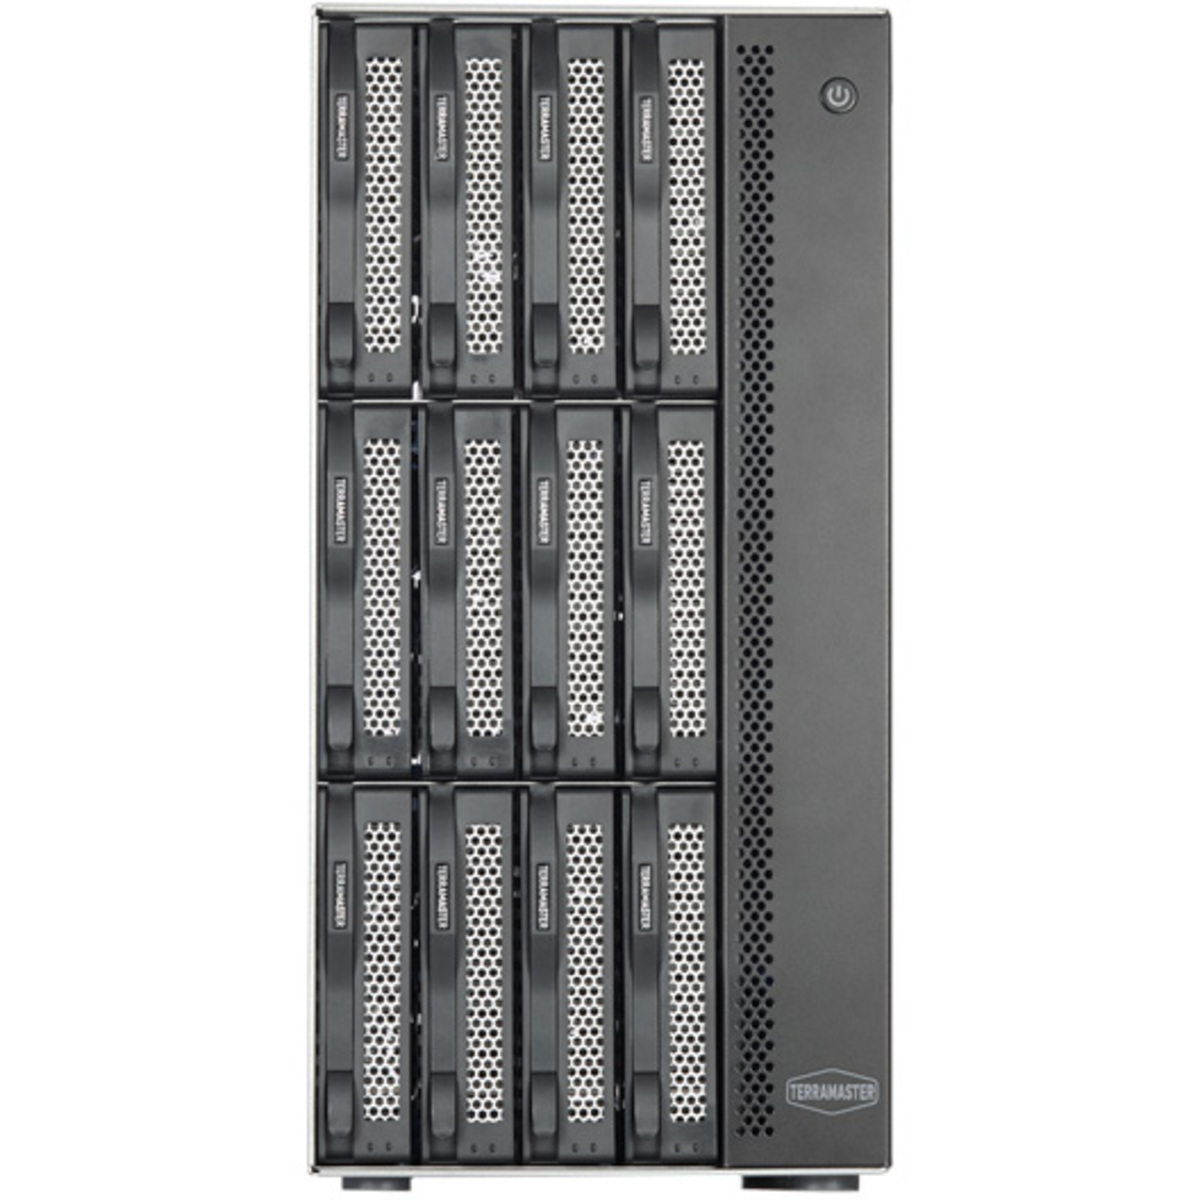 TerraMaster T12-423 126tb 12-Bay Desktop Multimedia / Power User / Business NAS - Network Attached Storage Device 7x18tb Western Digital Ultrastar DC HC550 WUH721818ALE6L4 3.5 7200rpm SATA 6Gb/s HDD ENTERPRISE Class Drives Installed - Burn-In Tested T12-423